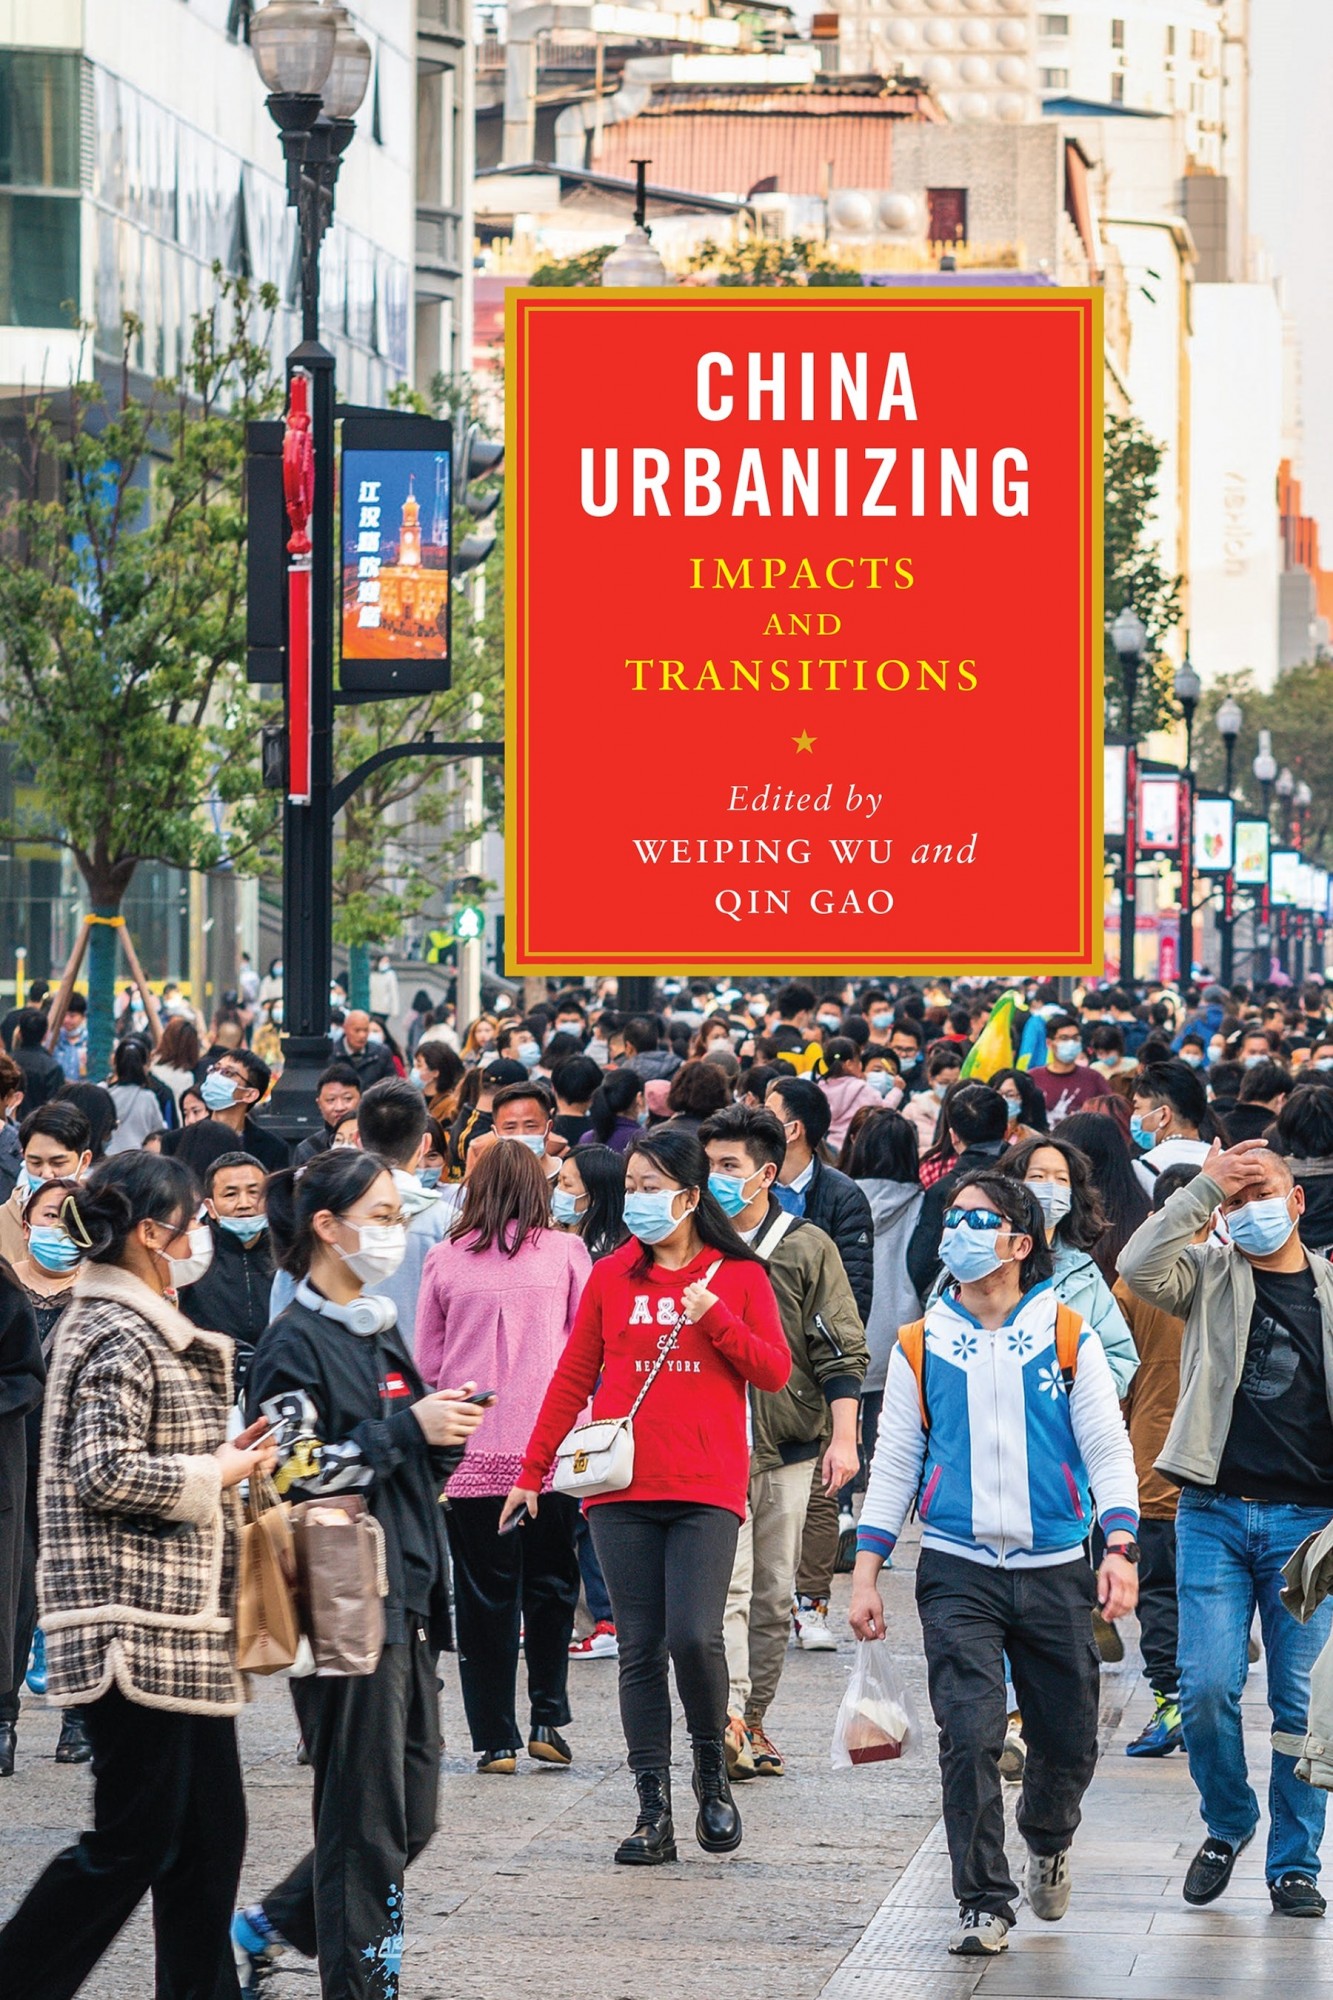 China Urbanizing: Impacts and Transitions, Edited by Weiping Wu and Qin Gao, University of Pennsylvania Press, A busy street corner with lots of pedestrians